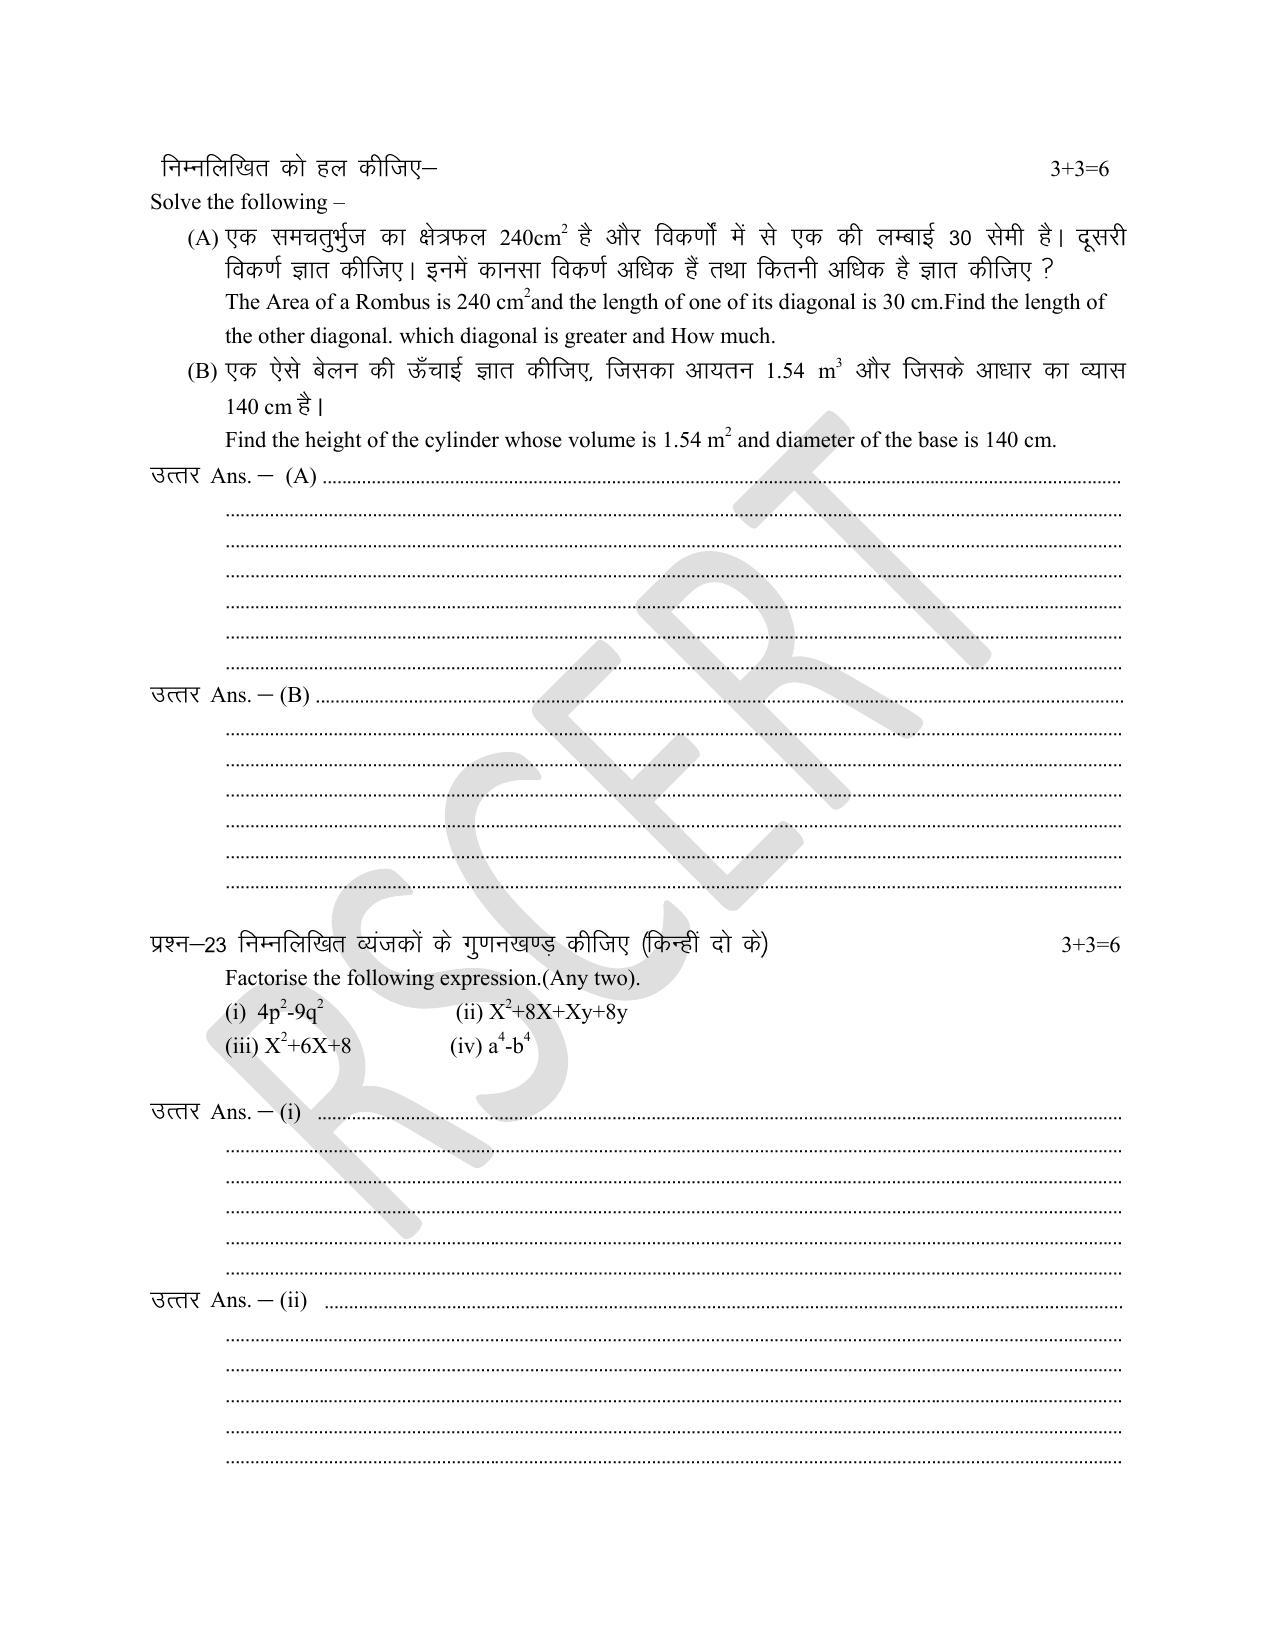 RBSE Class 8 Math & Science Sample Paper 2023 - Page 9